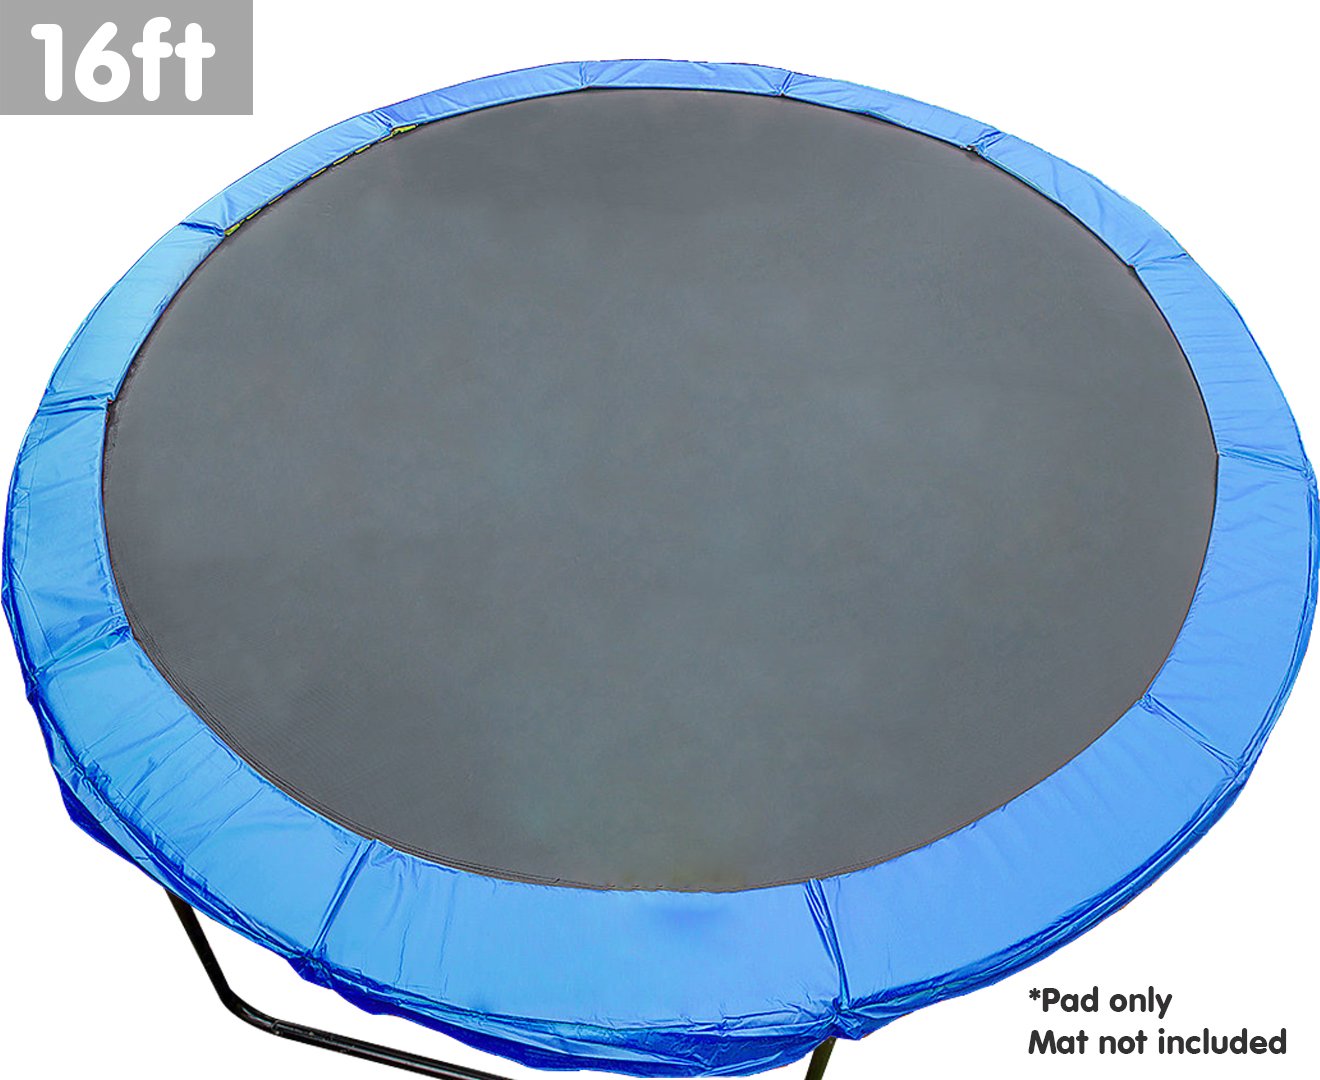 16ft Replacement Trampoline Pad Reinforced Outdoor Round Spring Cover 1